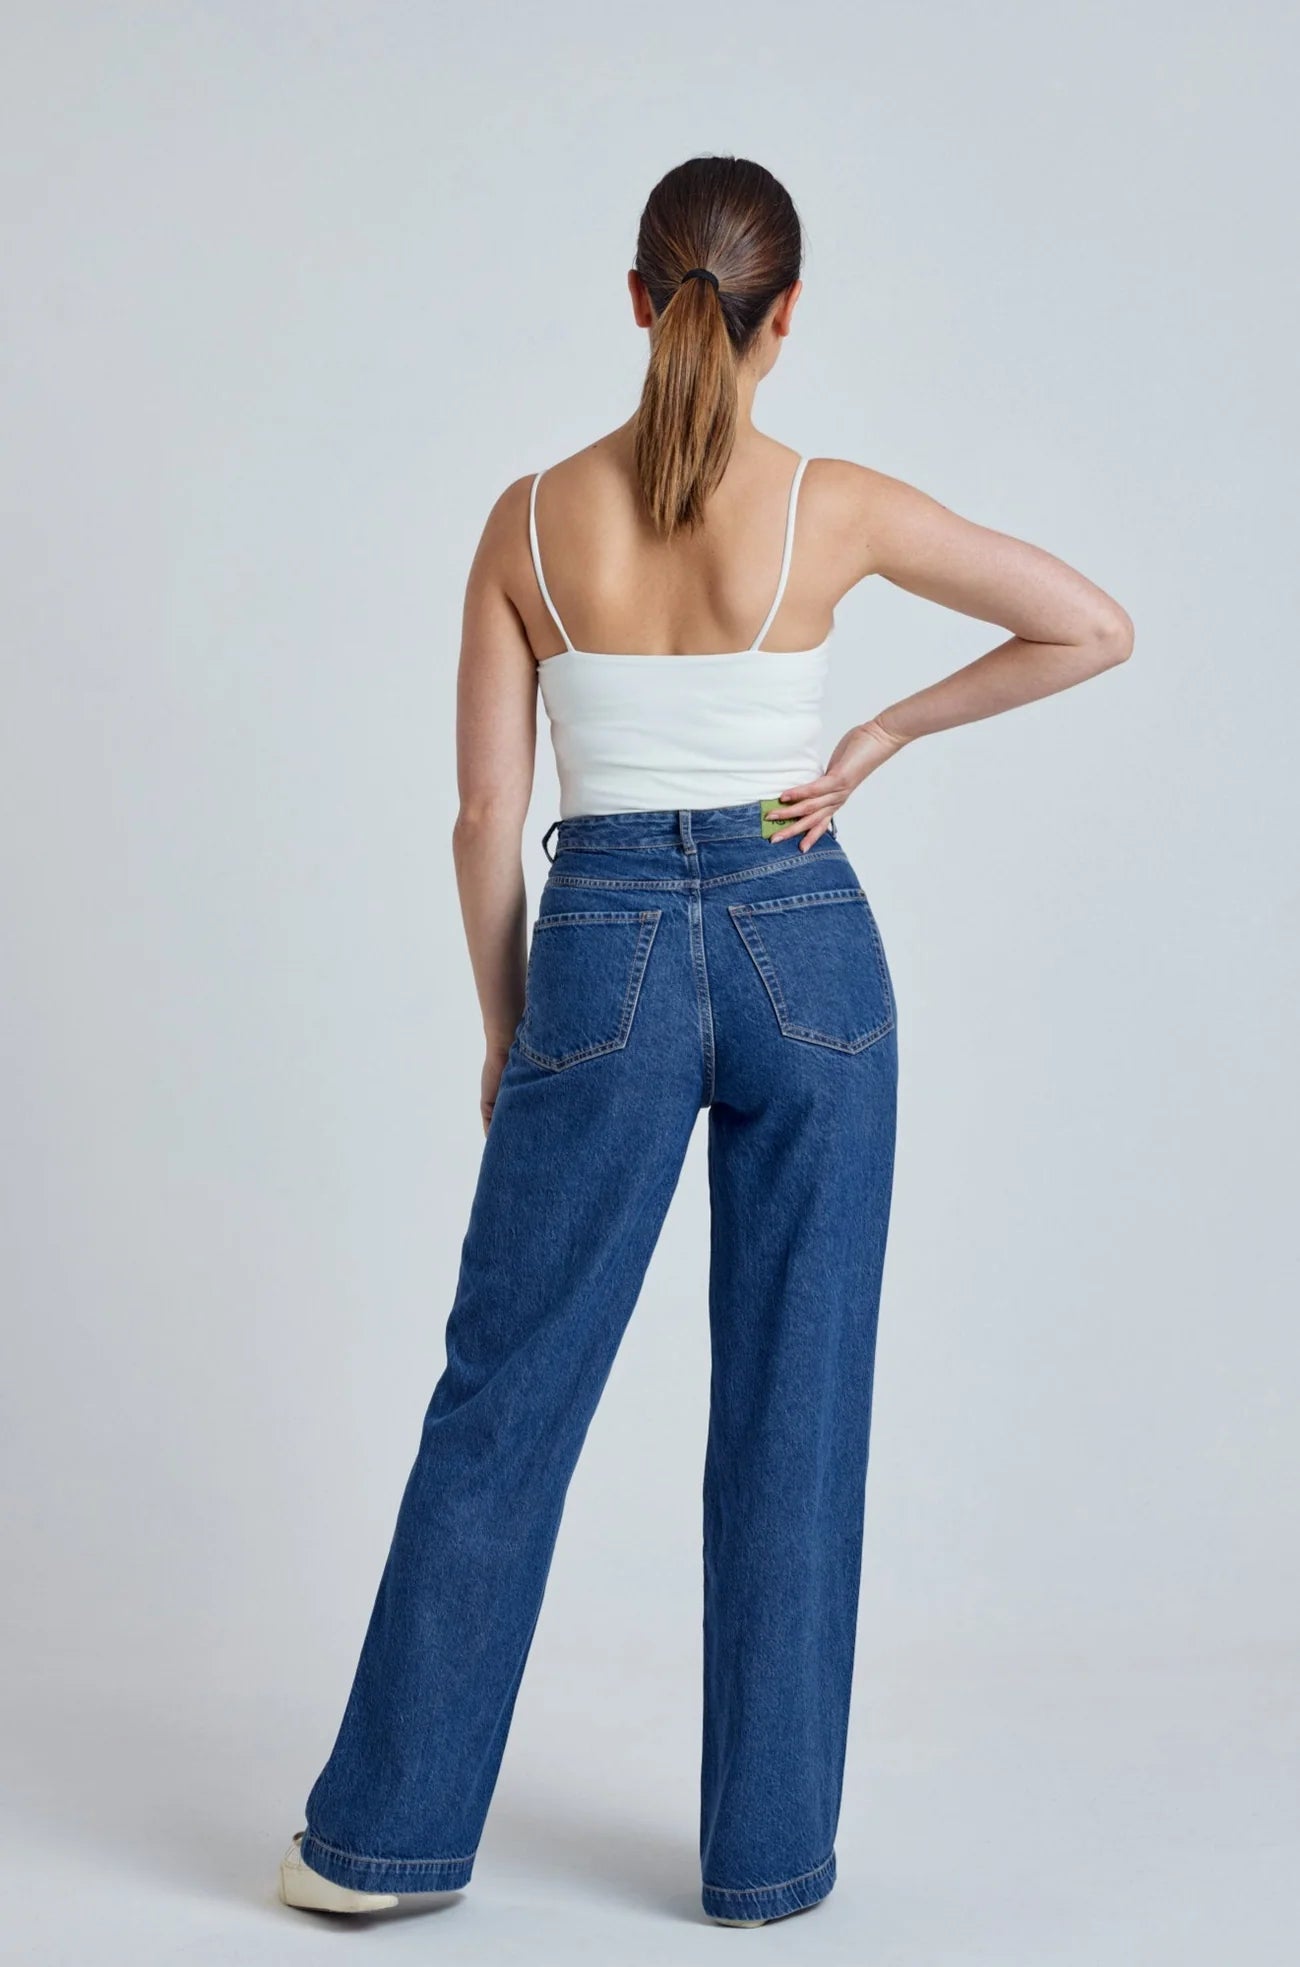 Beech Etta High Waist Wide Leg Jeans Pre Consumer Recycled Lyocell, Lyocell, Recycled Cotton and Acetate Long